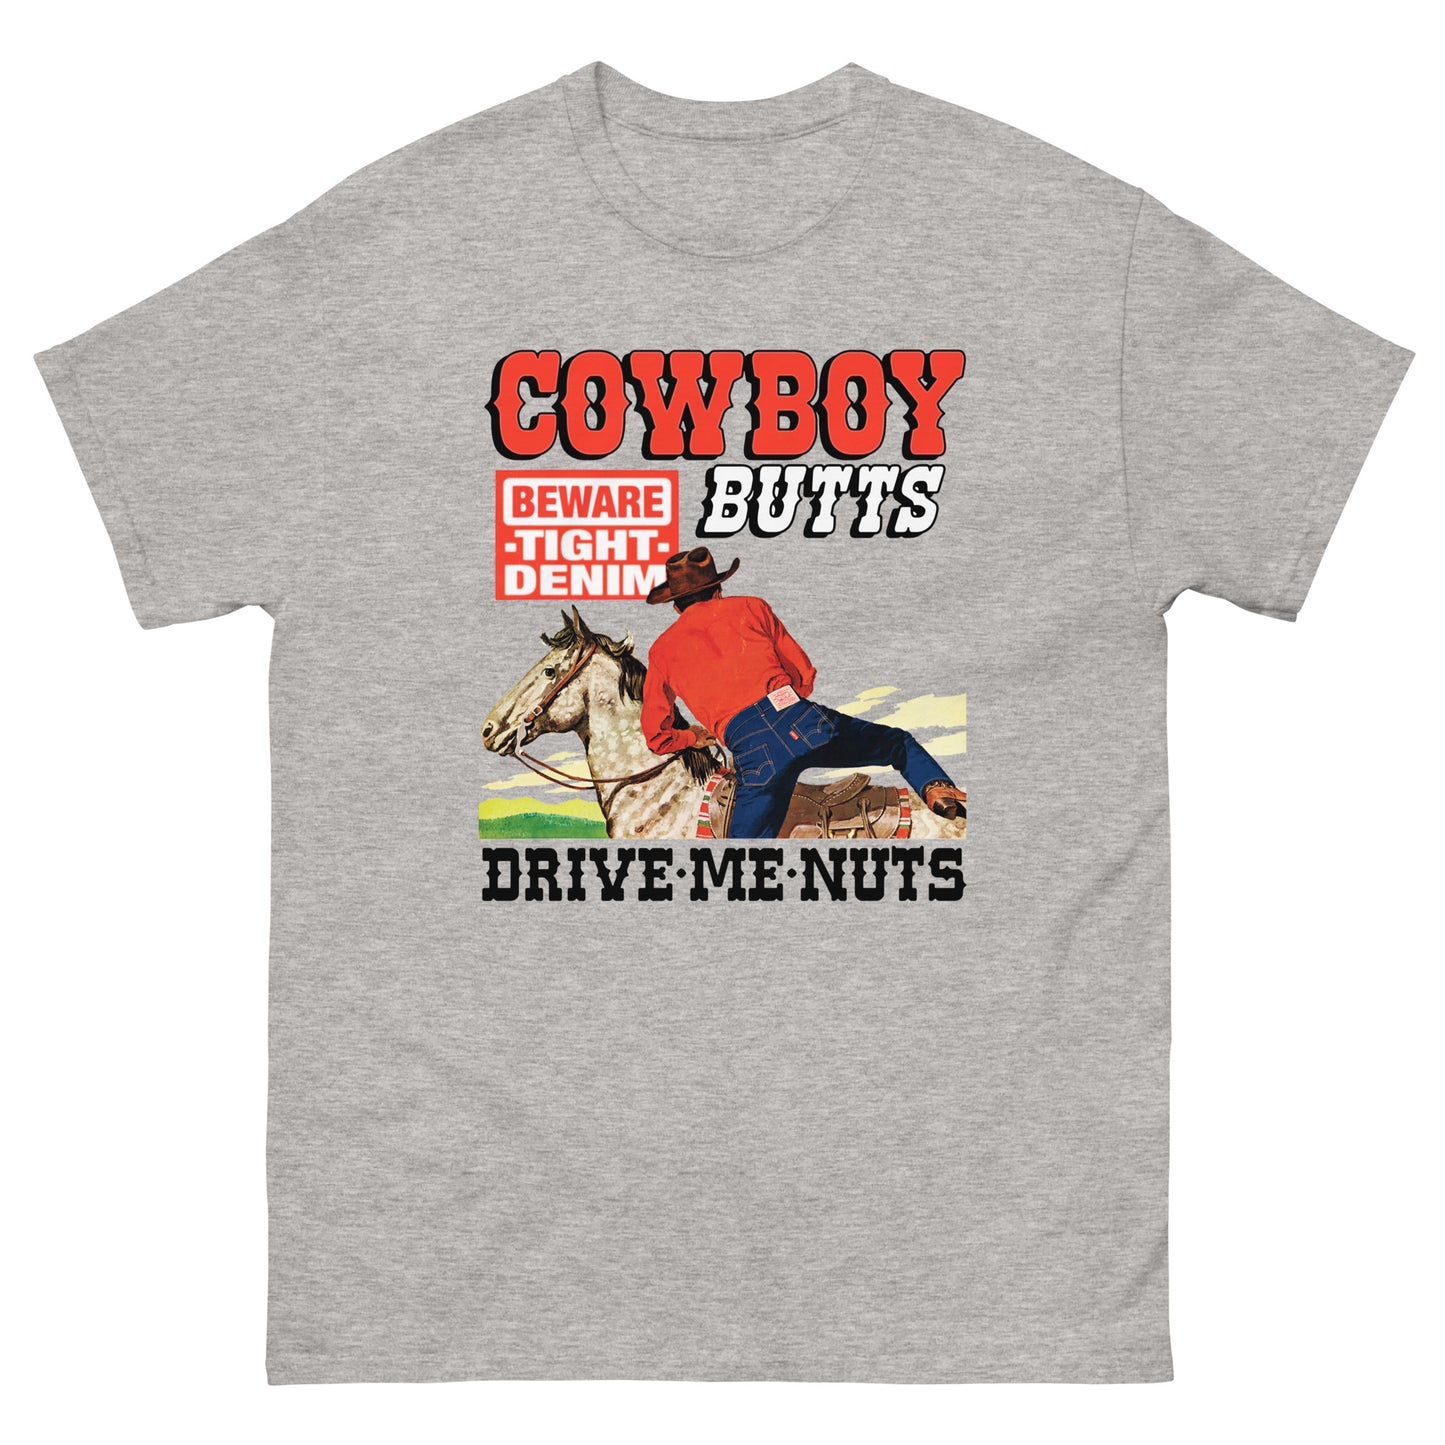 Cowboy Butts Drive Me Nuts.